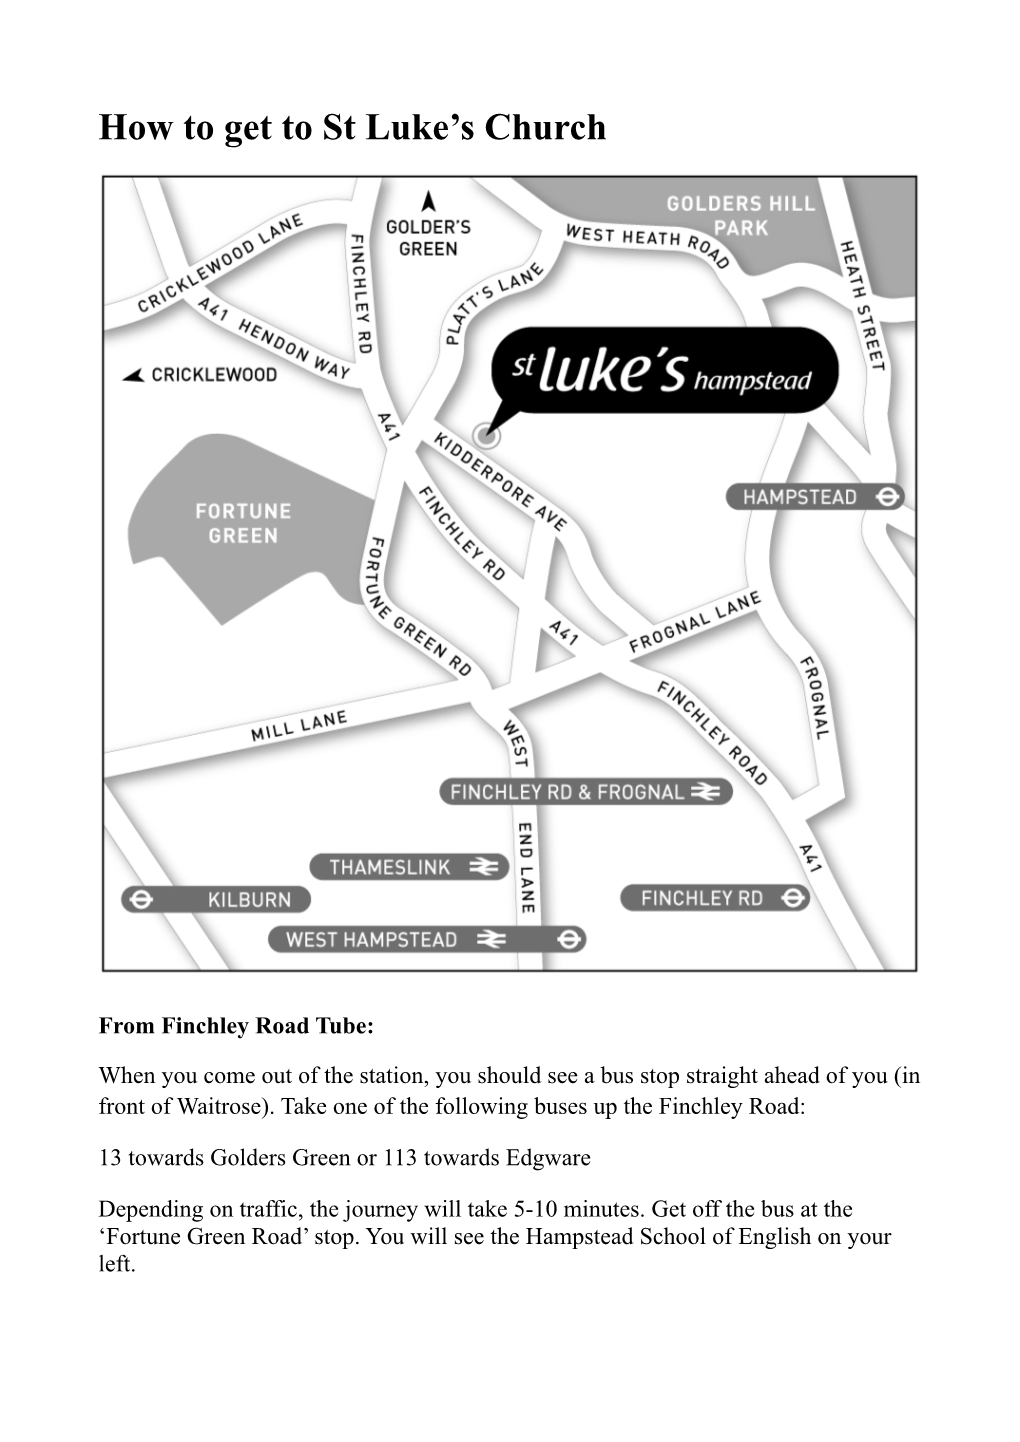 How to Get to St Luke's Church